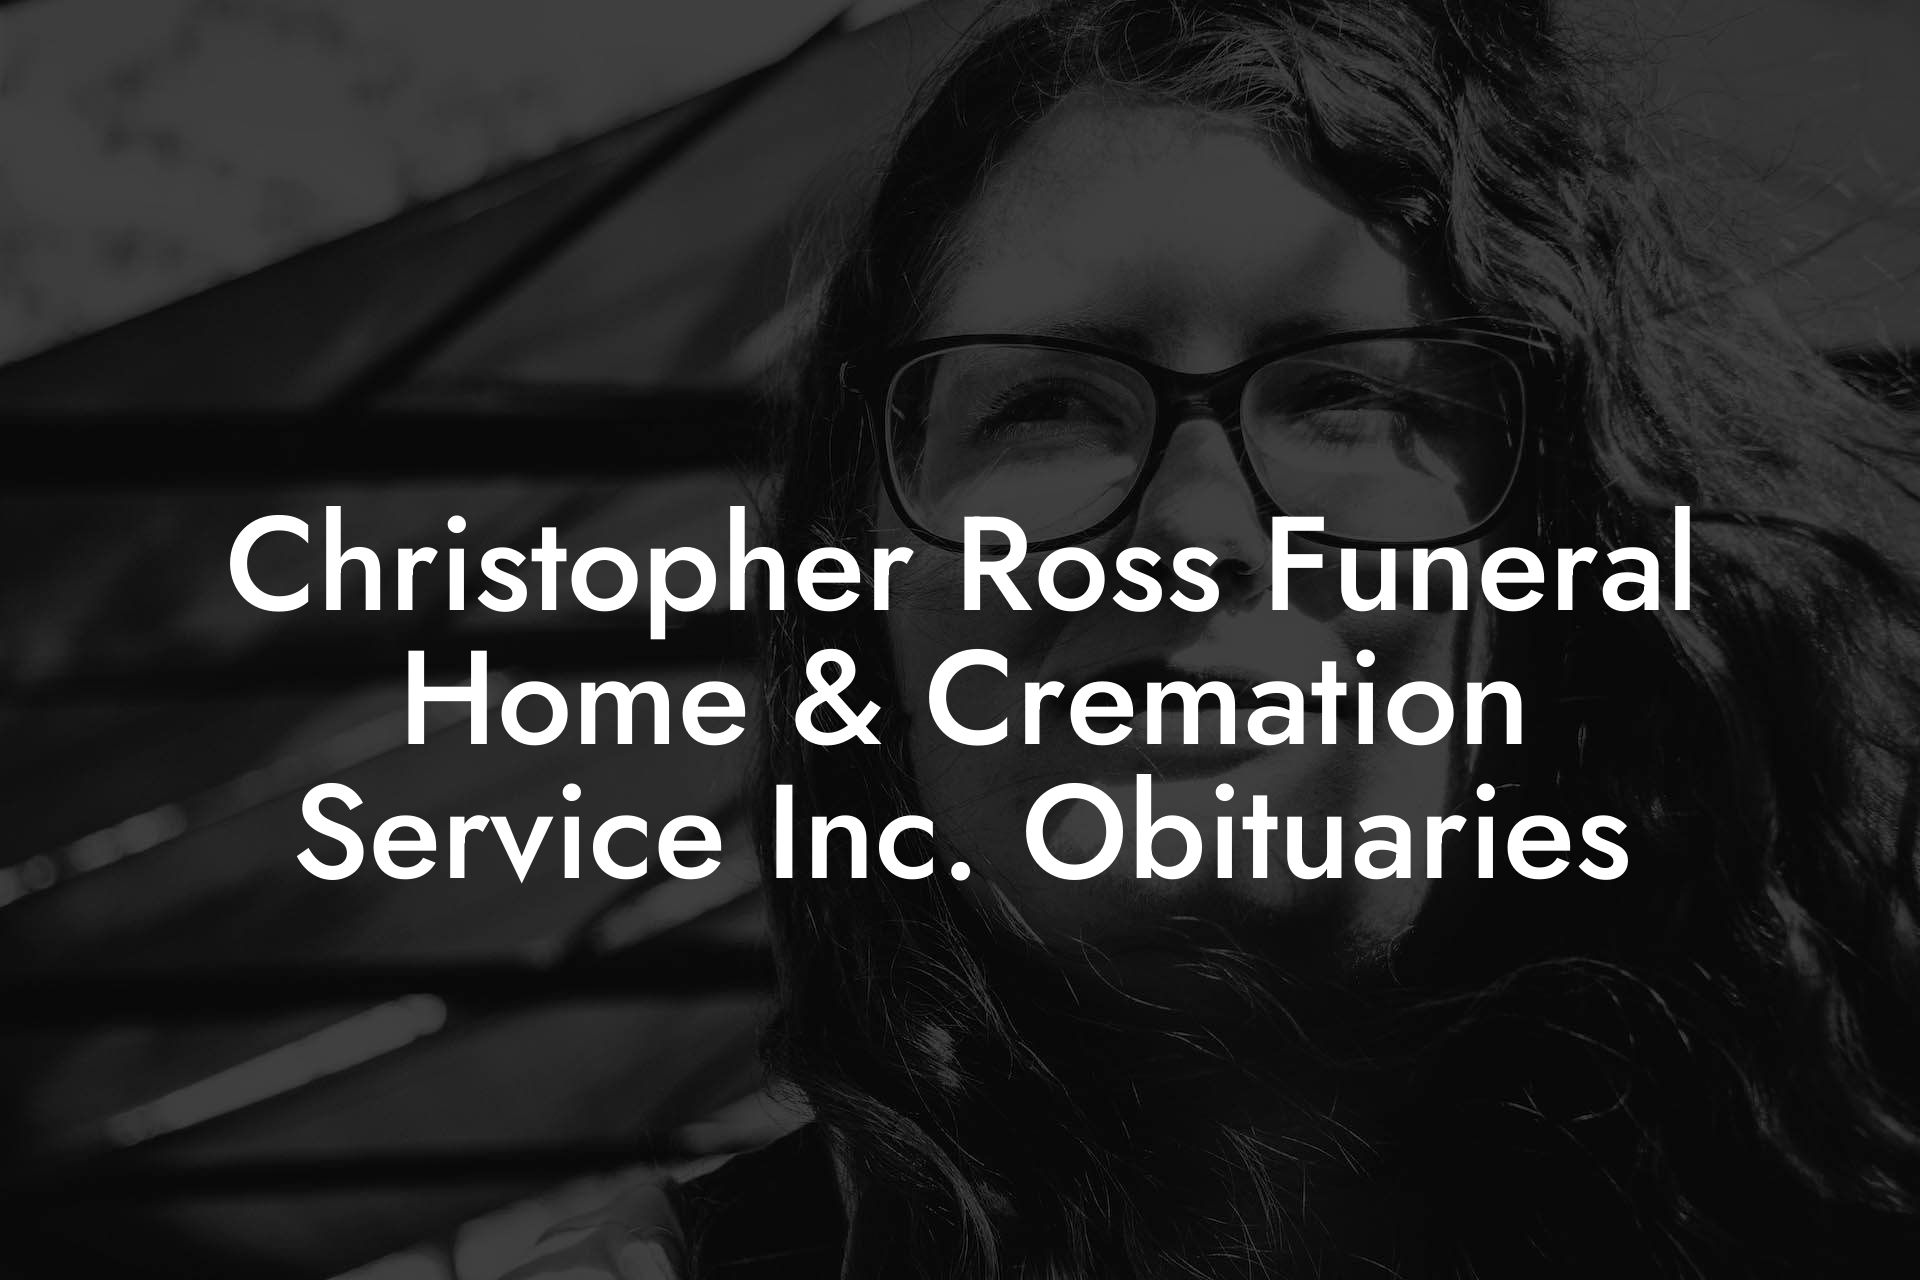 Christopher Ross Funeral Home & Cremation Service Inc. Obituaries